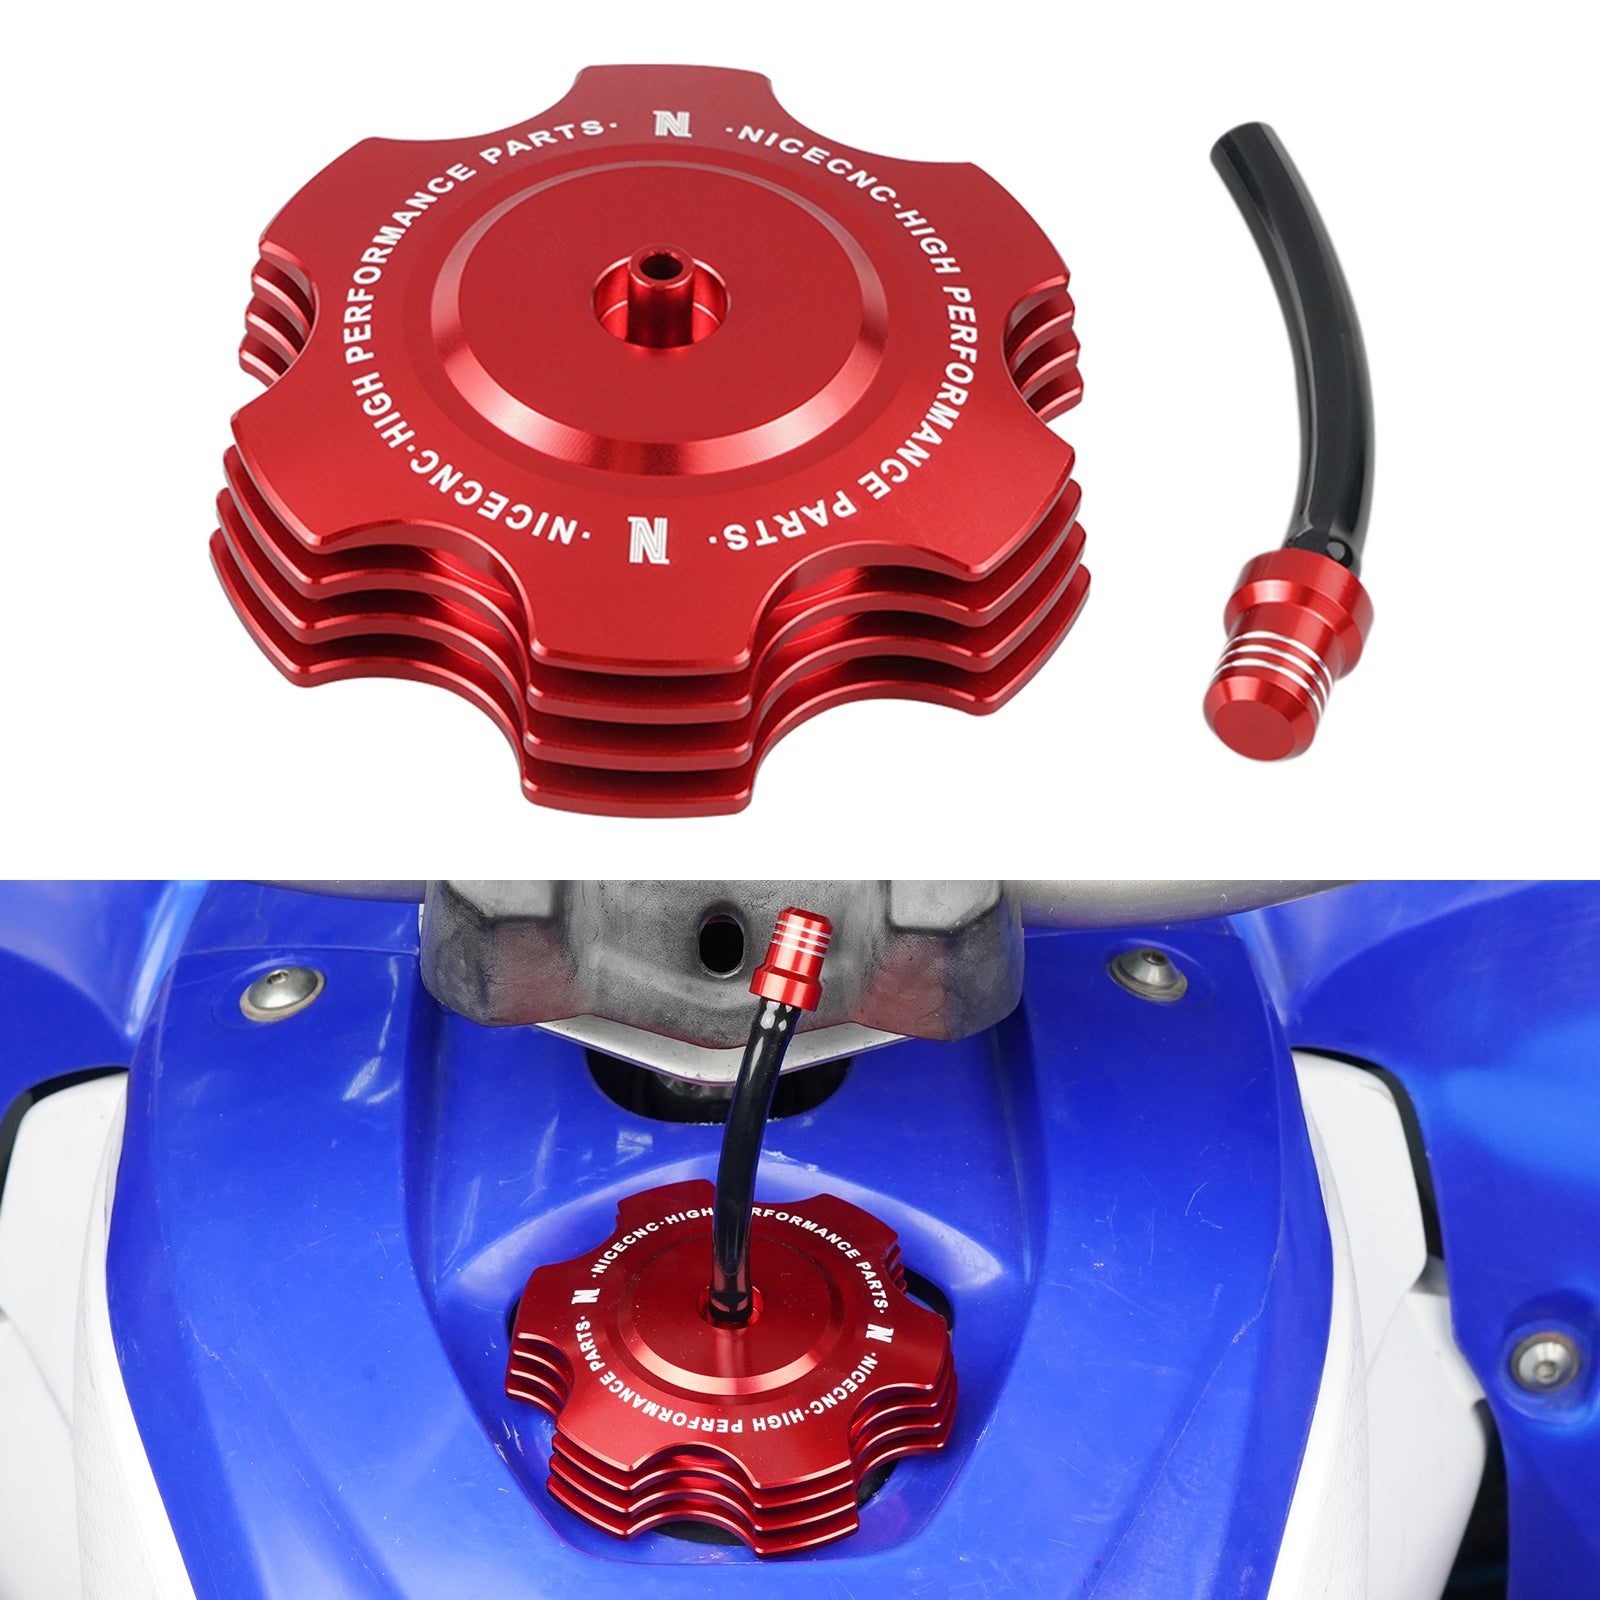 fuel tank - What is the name of the part to which the gas cap